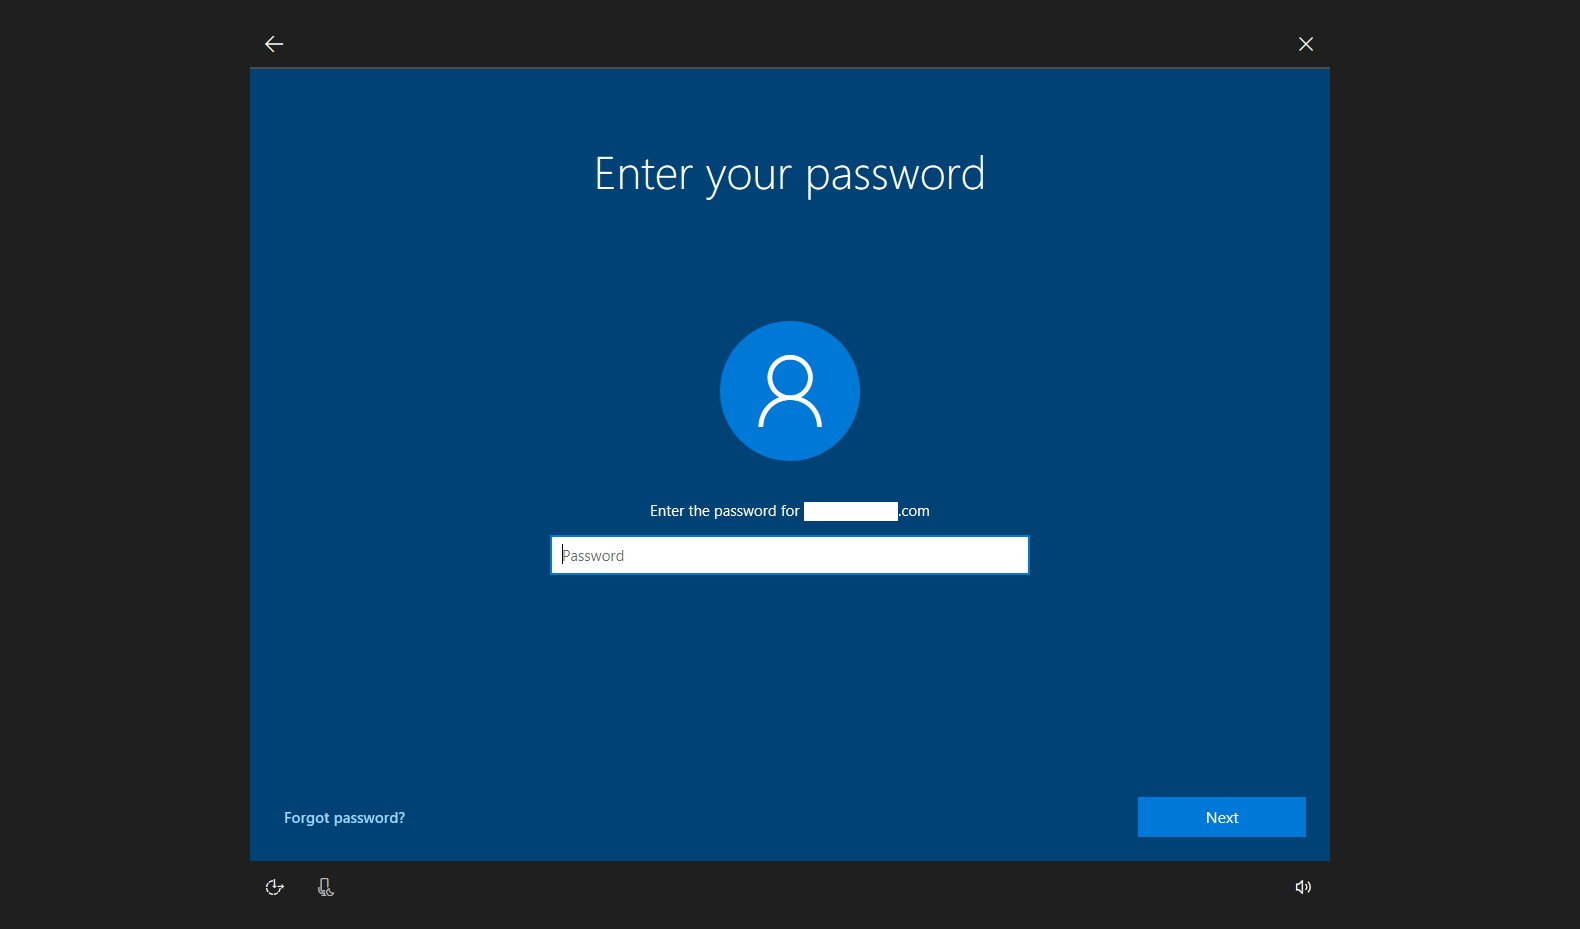 How to reset password from the Lock screen on the Windows 7 Fall